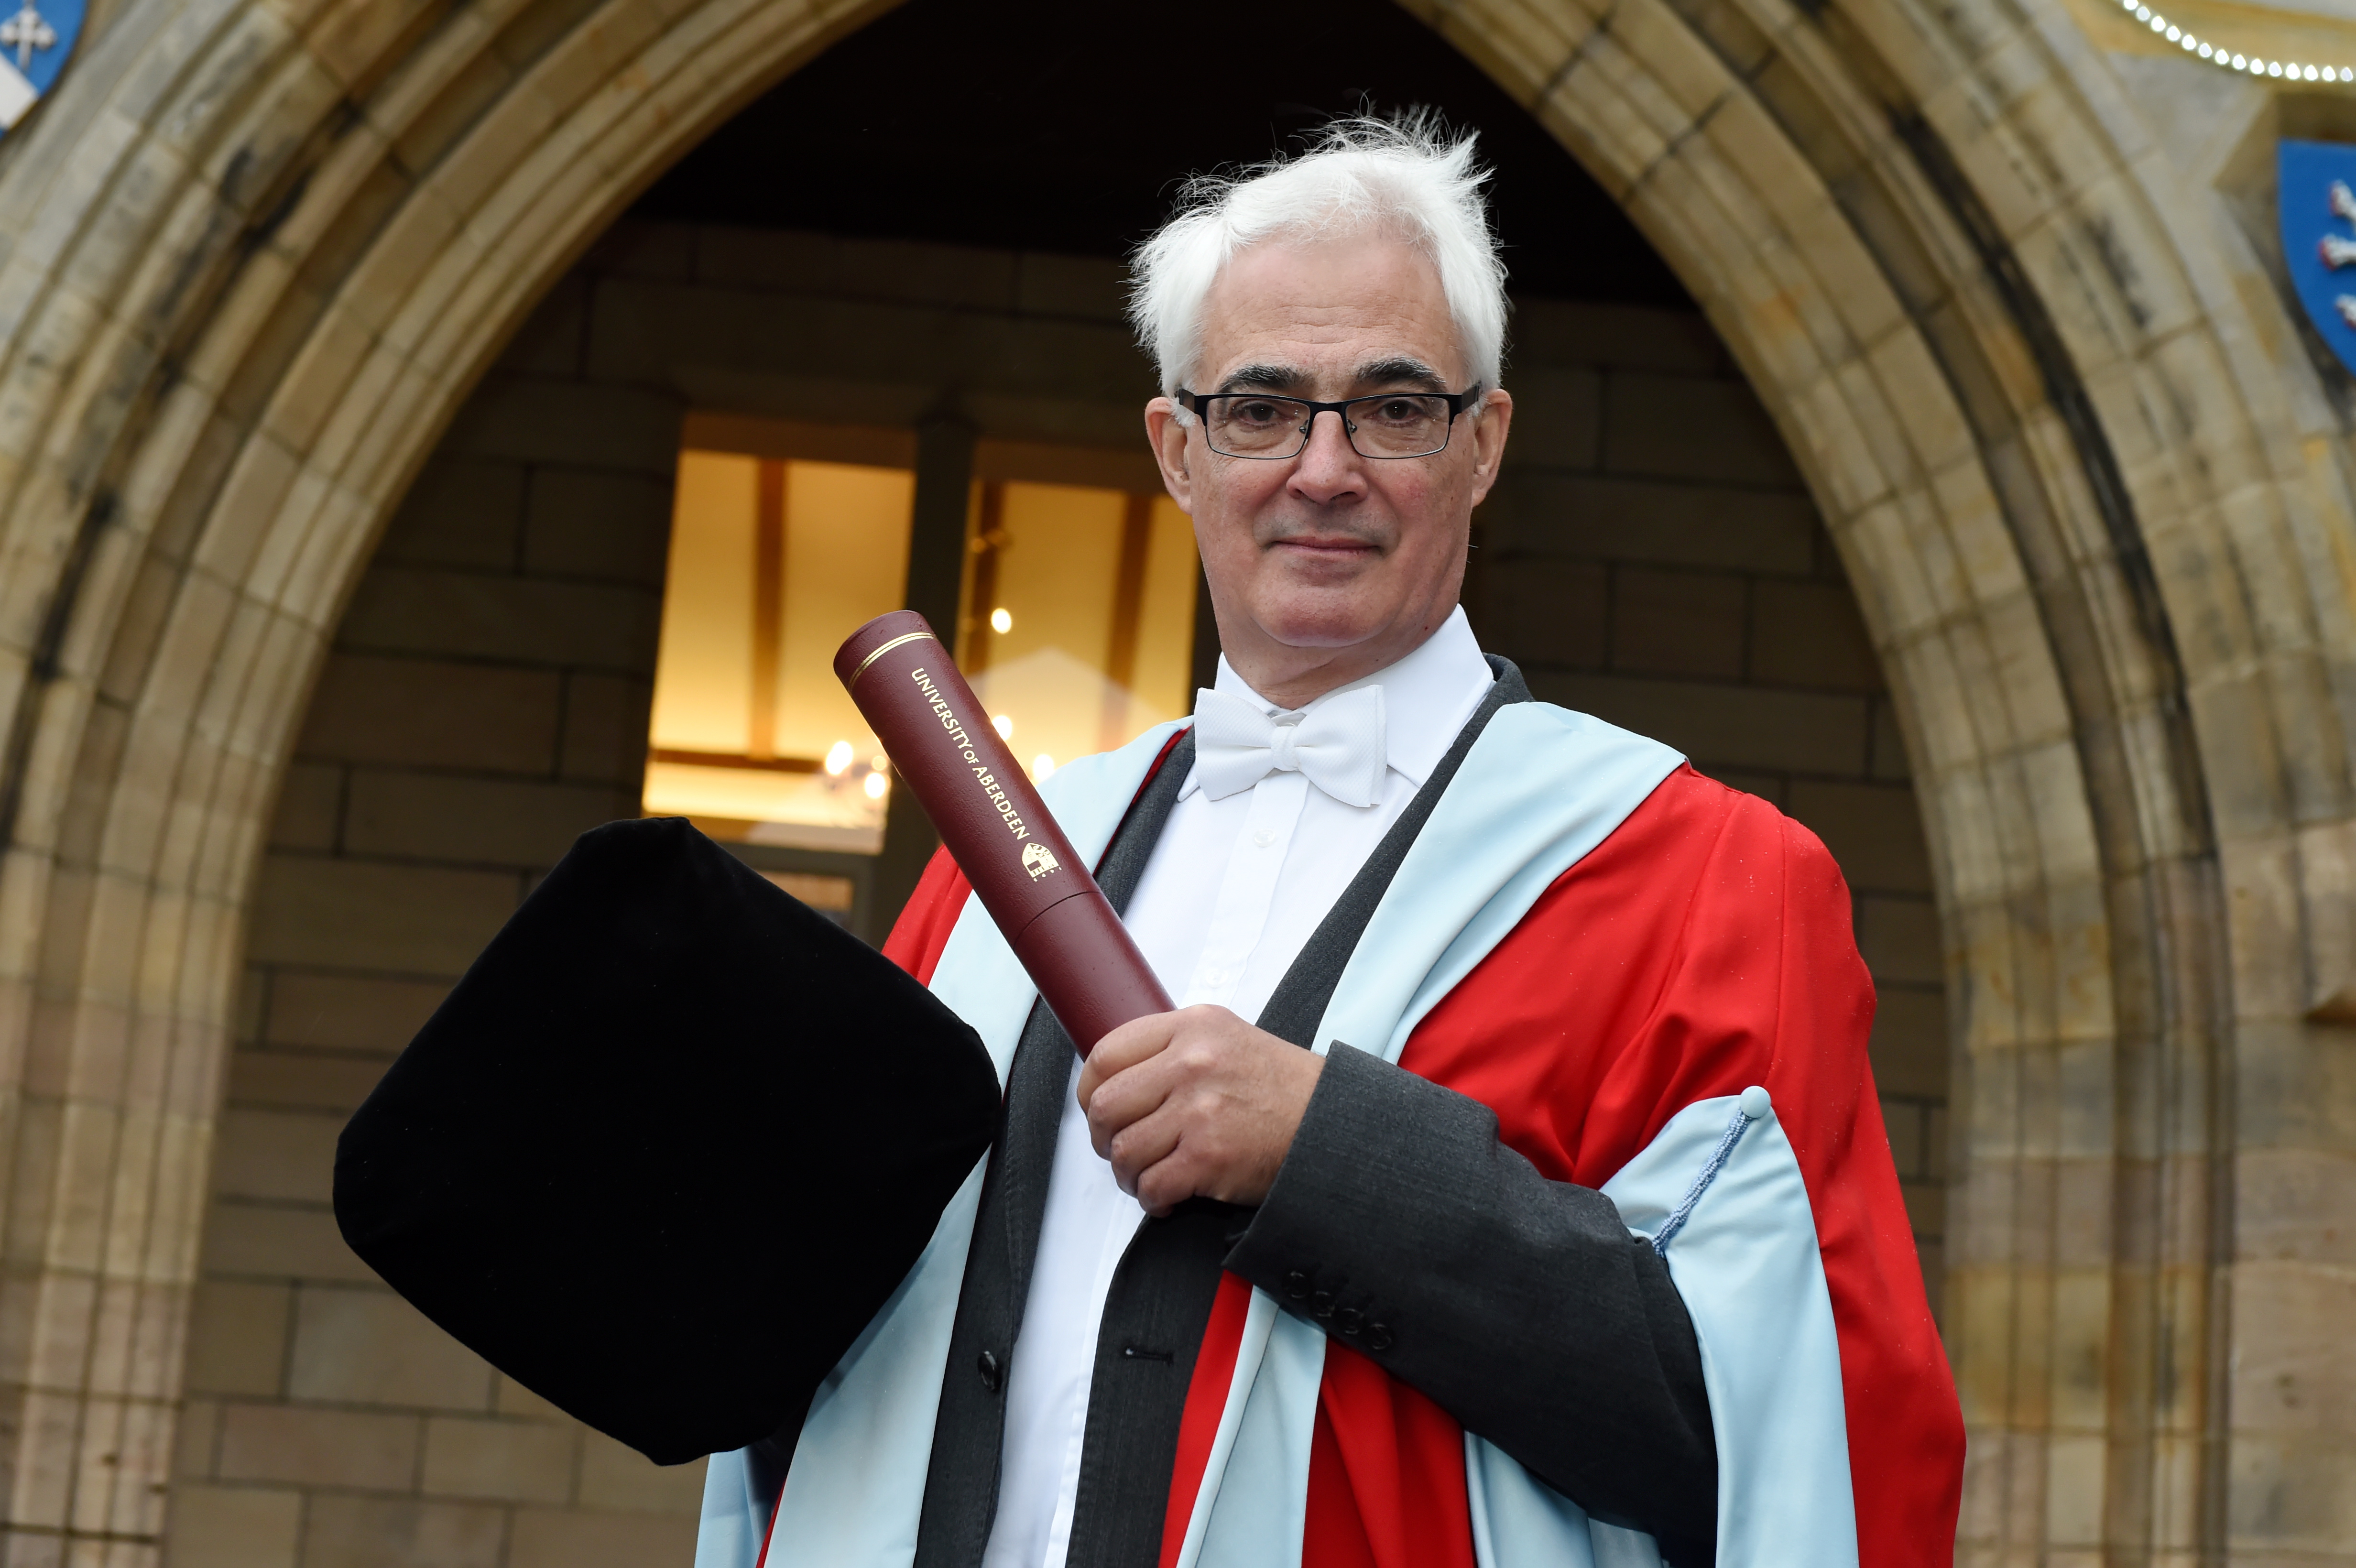 Alistair Darling received an honorary degree from Aberdeen University.